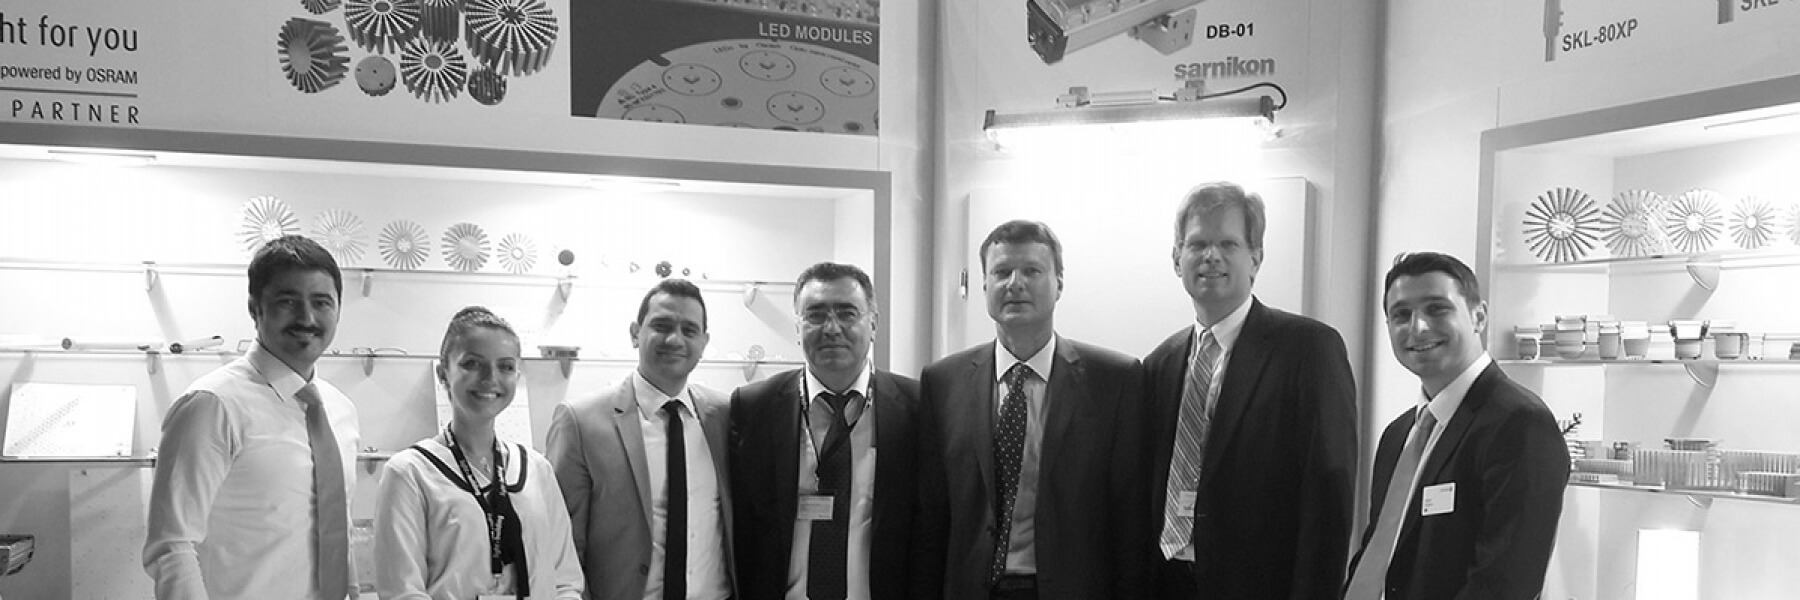 Osram CEO visited our booth